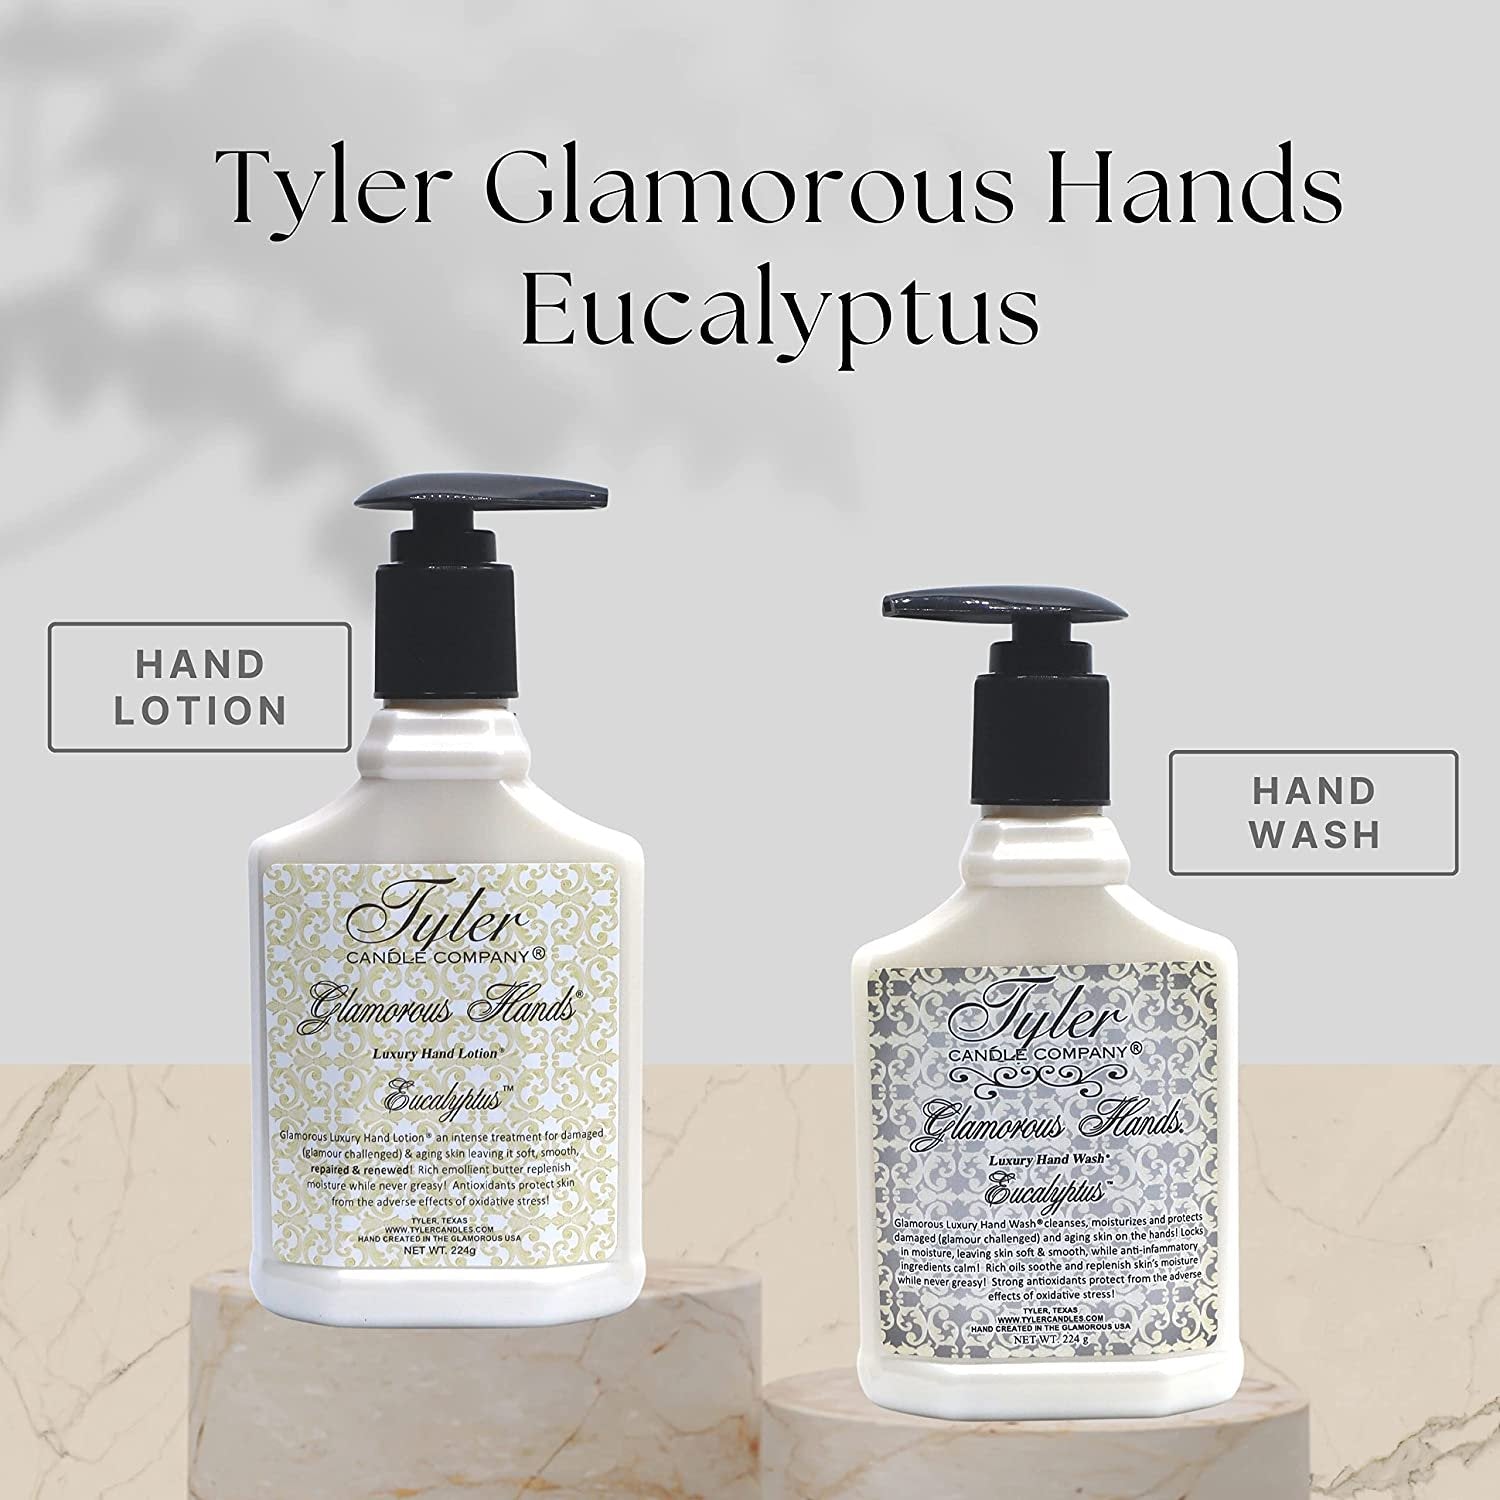 Worldwide Nutrition Tyler Candle Company Eucalyptus Glamorous Hand Wash and Hand Lotion Gift Set - Pack of 2, 8 Oz Scented Hand Cream Pump Bottles for Luxury Skin Care with Bonus Key Chain